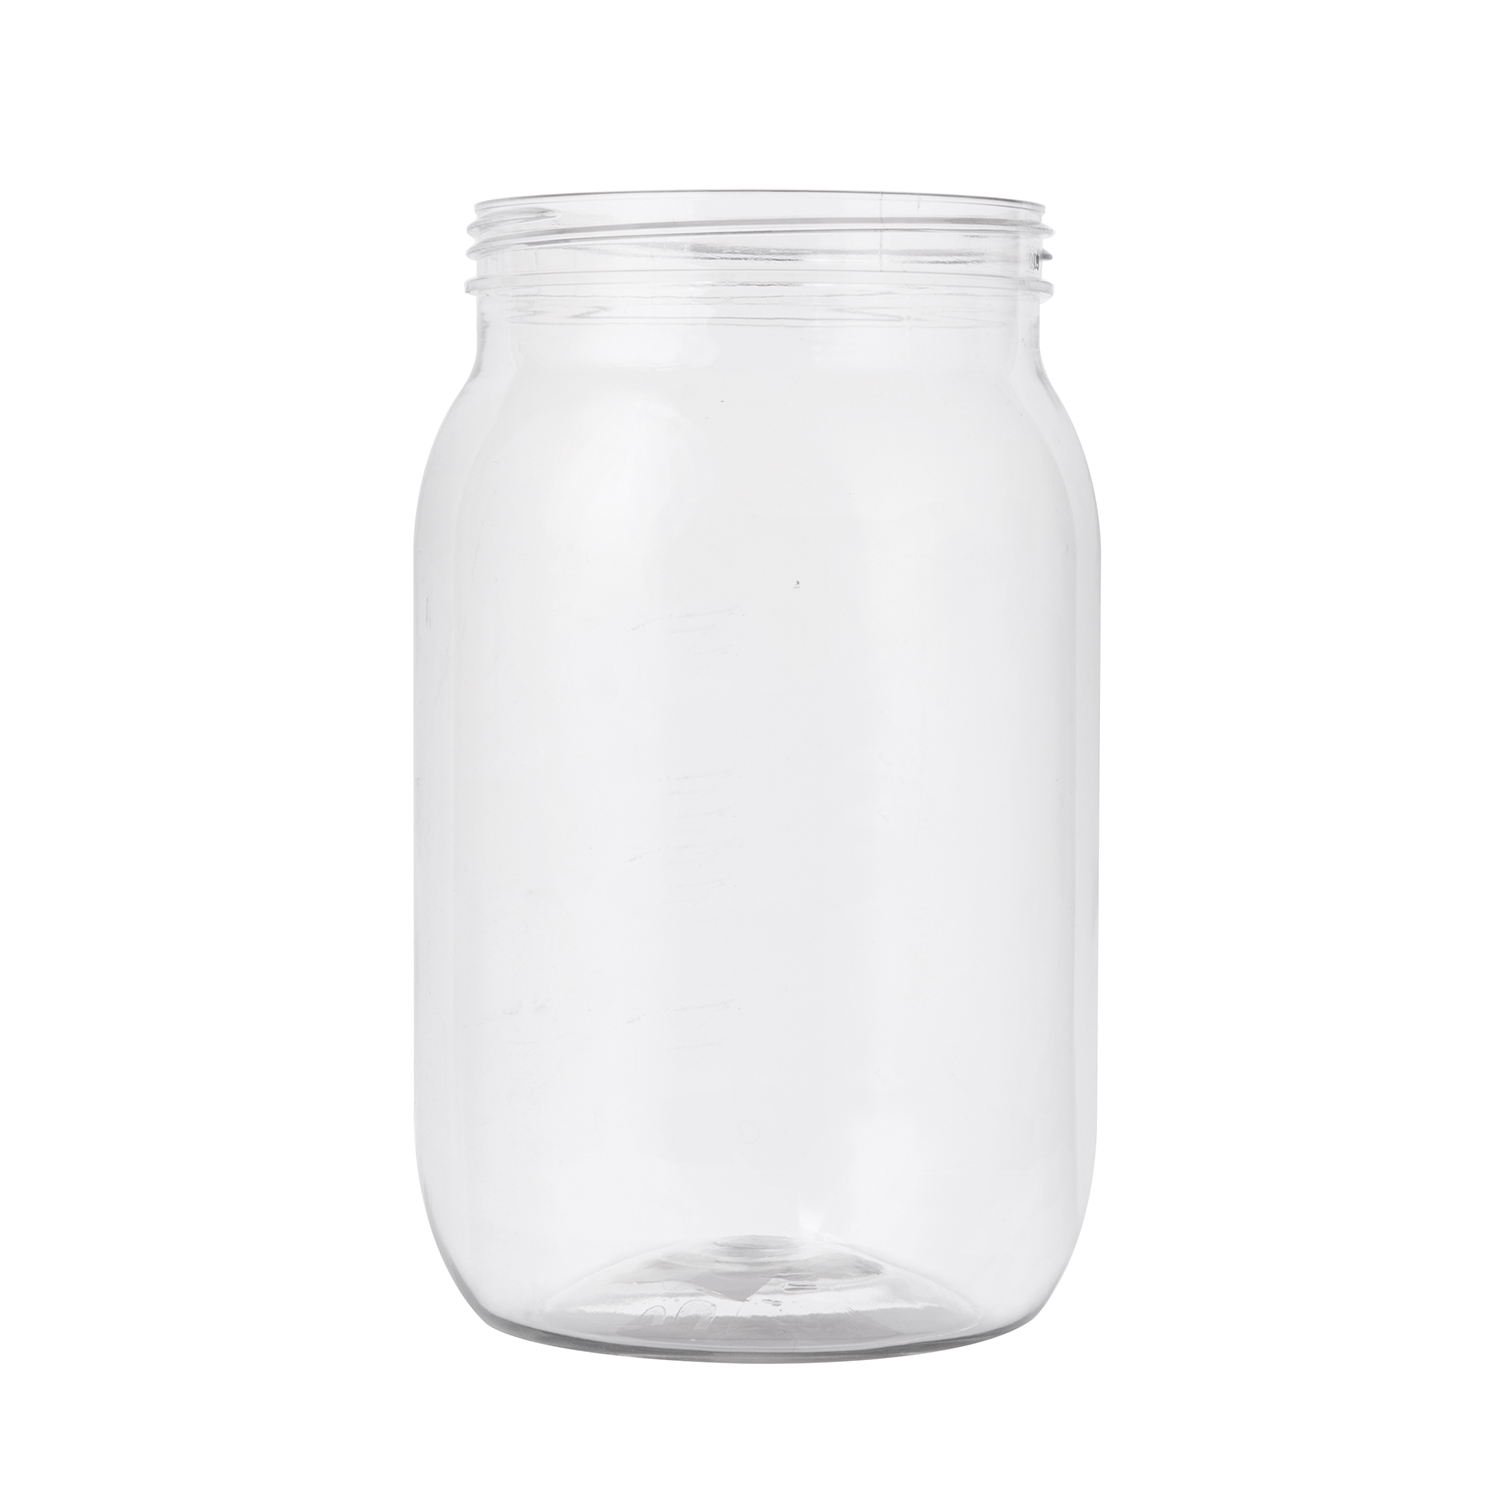 600ml 1000ml Plastic Bottle Containers Packaging PET Plastic Wide Mouth Jar With Lid